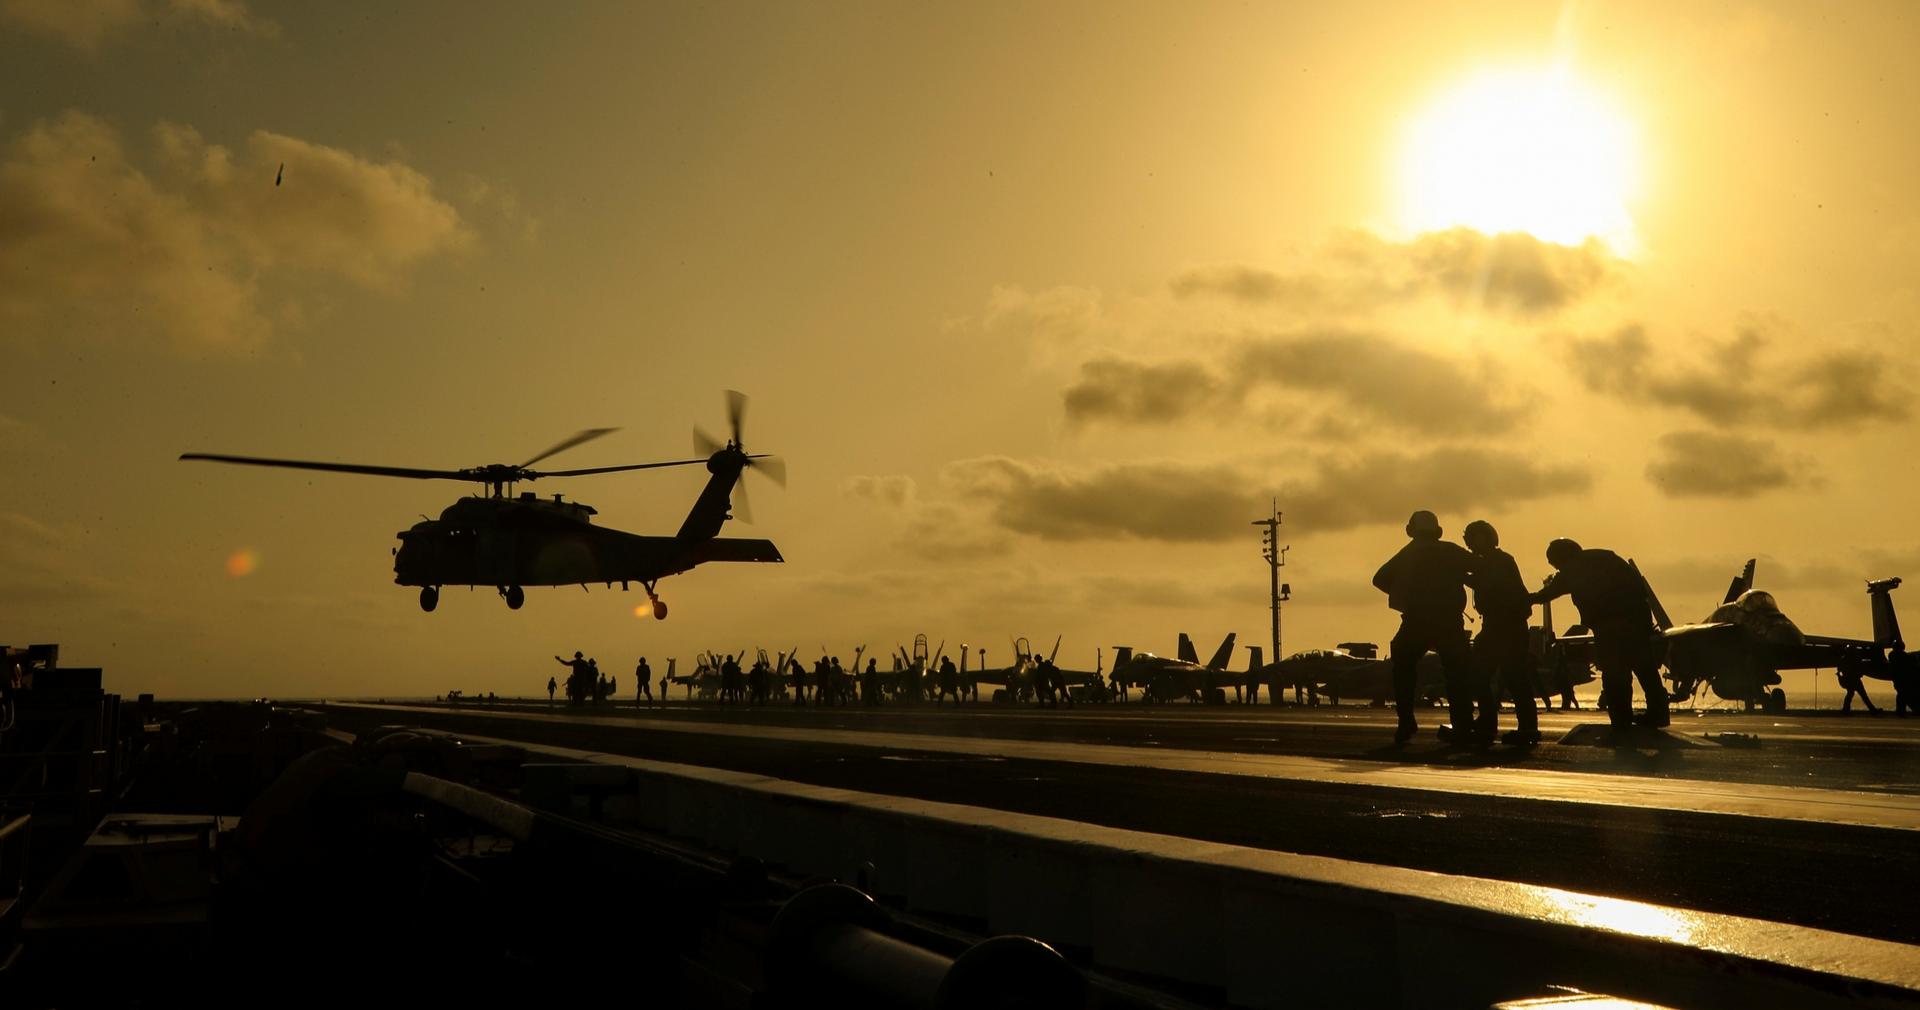 An MH-60S Seahawk helicopter lifts off the flight deck of the US Navy aircraft carrier USS Abraham Lincoln in the Arabian Sea, June 3, 2019.